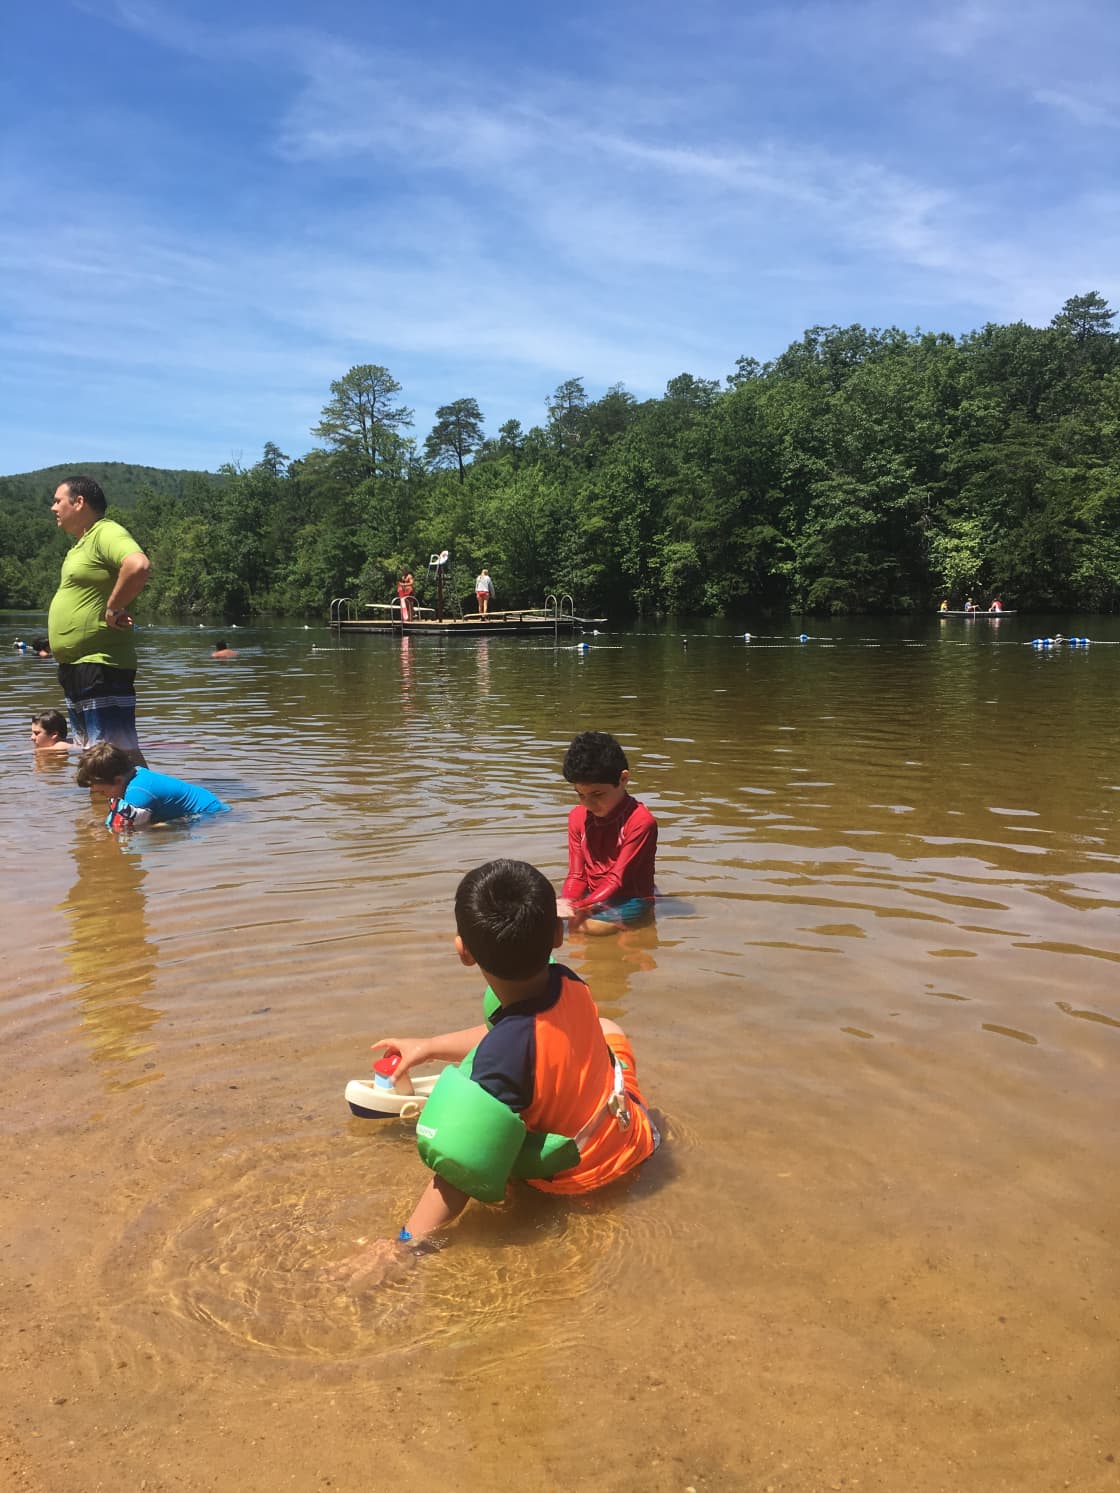 Kids looking for salamanders and small fish at Hanging Rock lake, while visitors enjoy diving off dock in background and rent canoes.